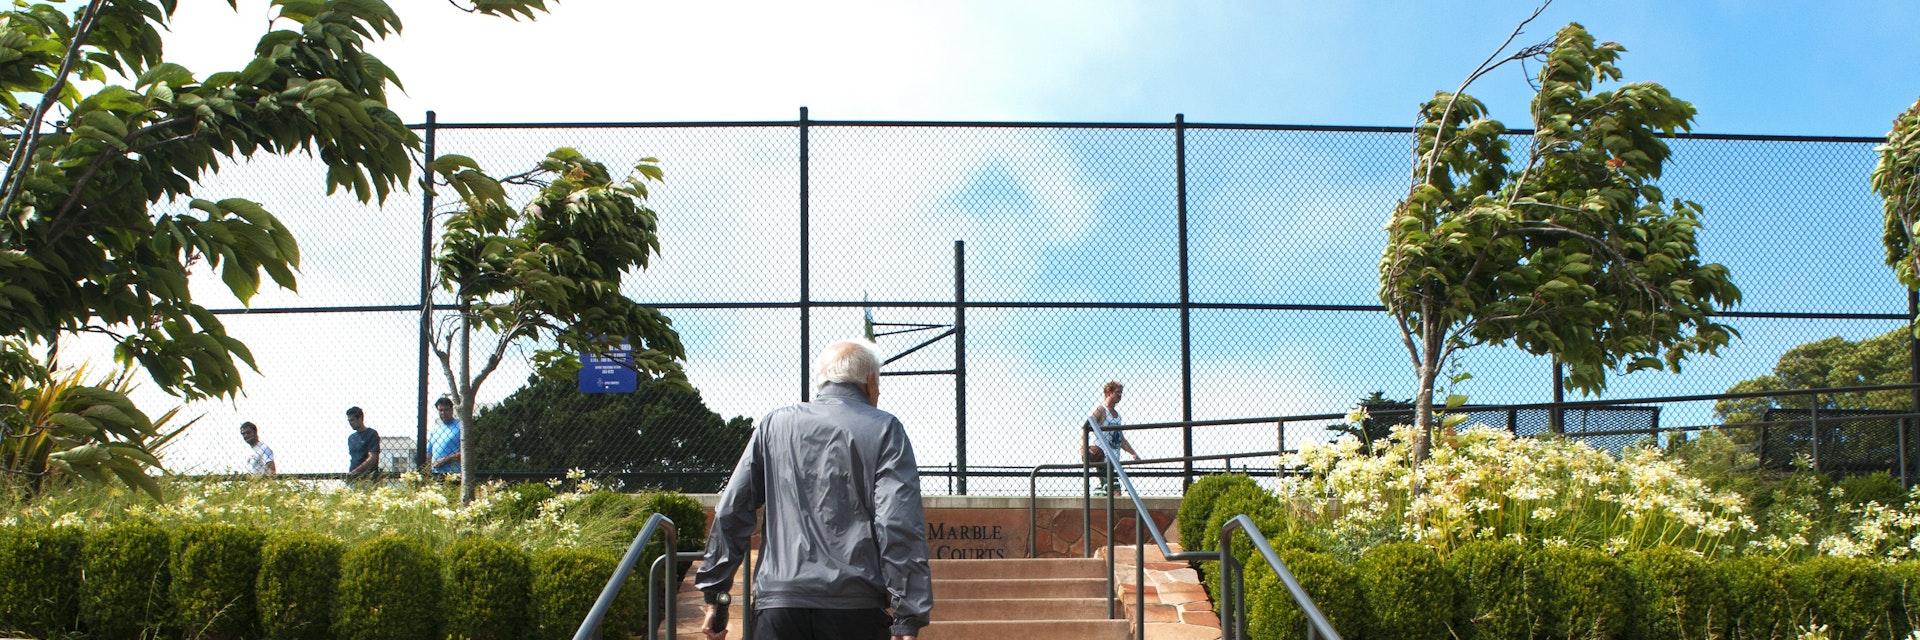 Stairs to tennis courts and basketball court in Sterling Park.